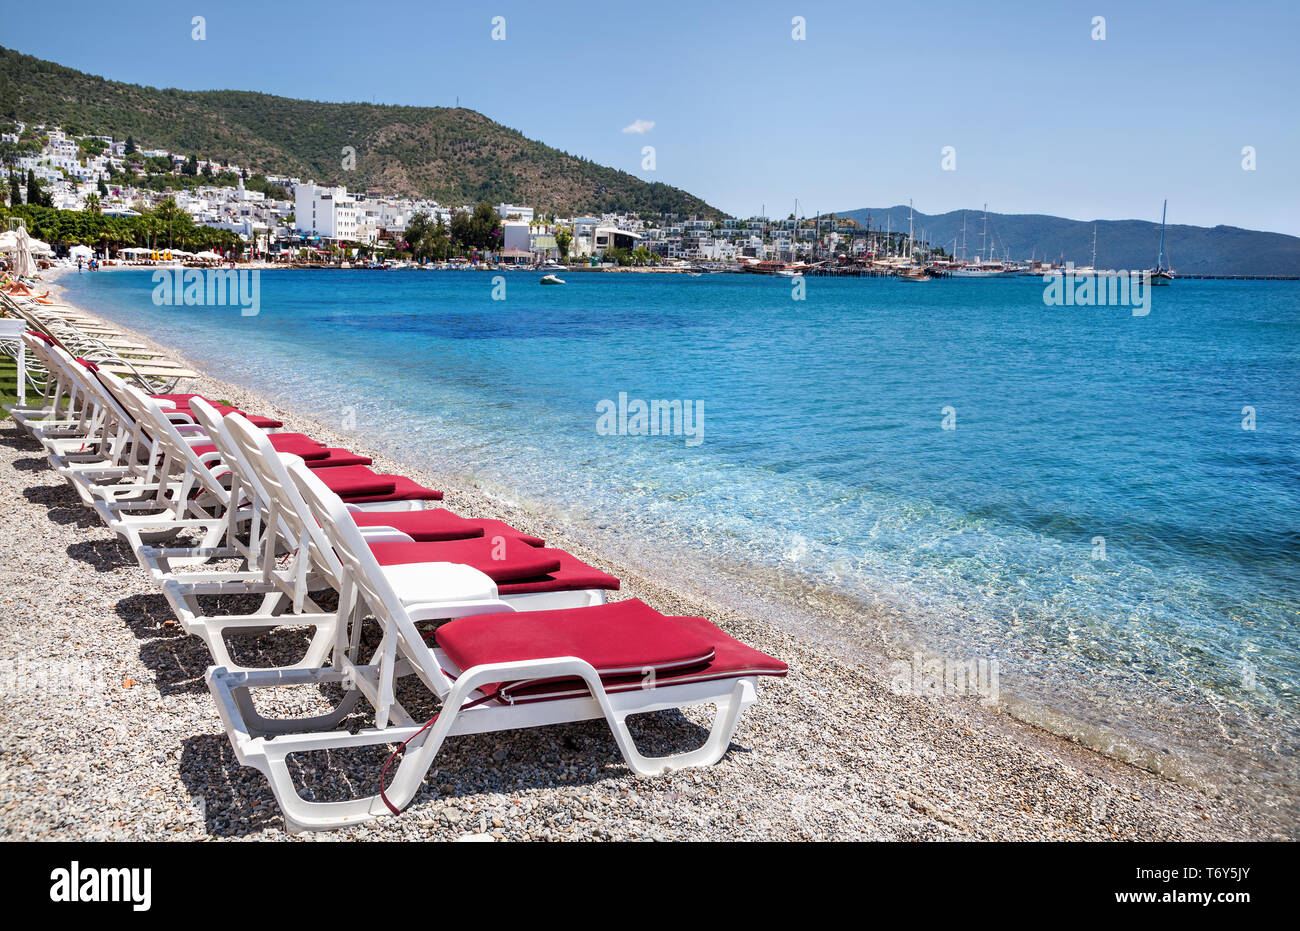 White sunbeds with red cover on the beach in Bodrum, Turkey Stock Photo